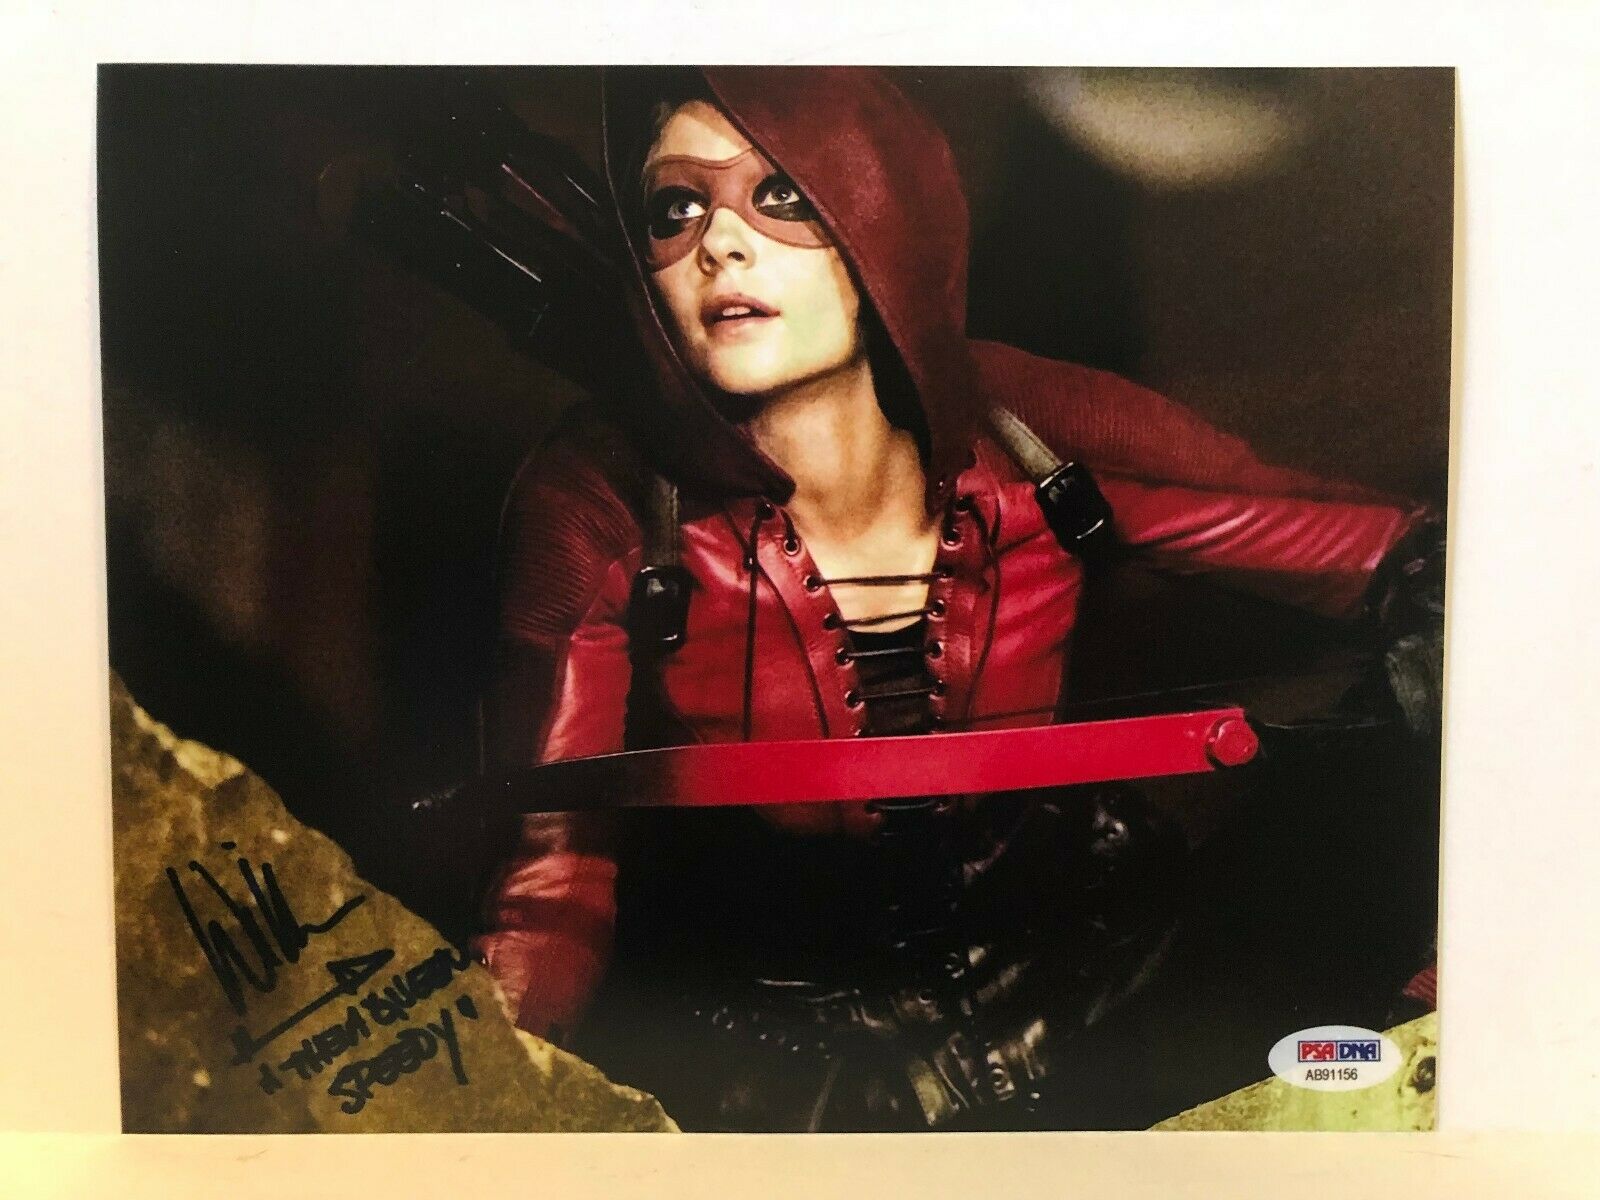 Willa Holland  'arrow' Signed 8x10 Photo Authentic Psa Dna Reprint